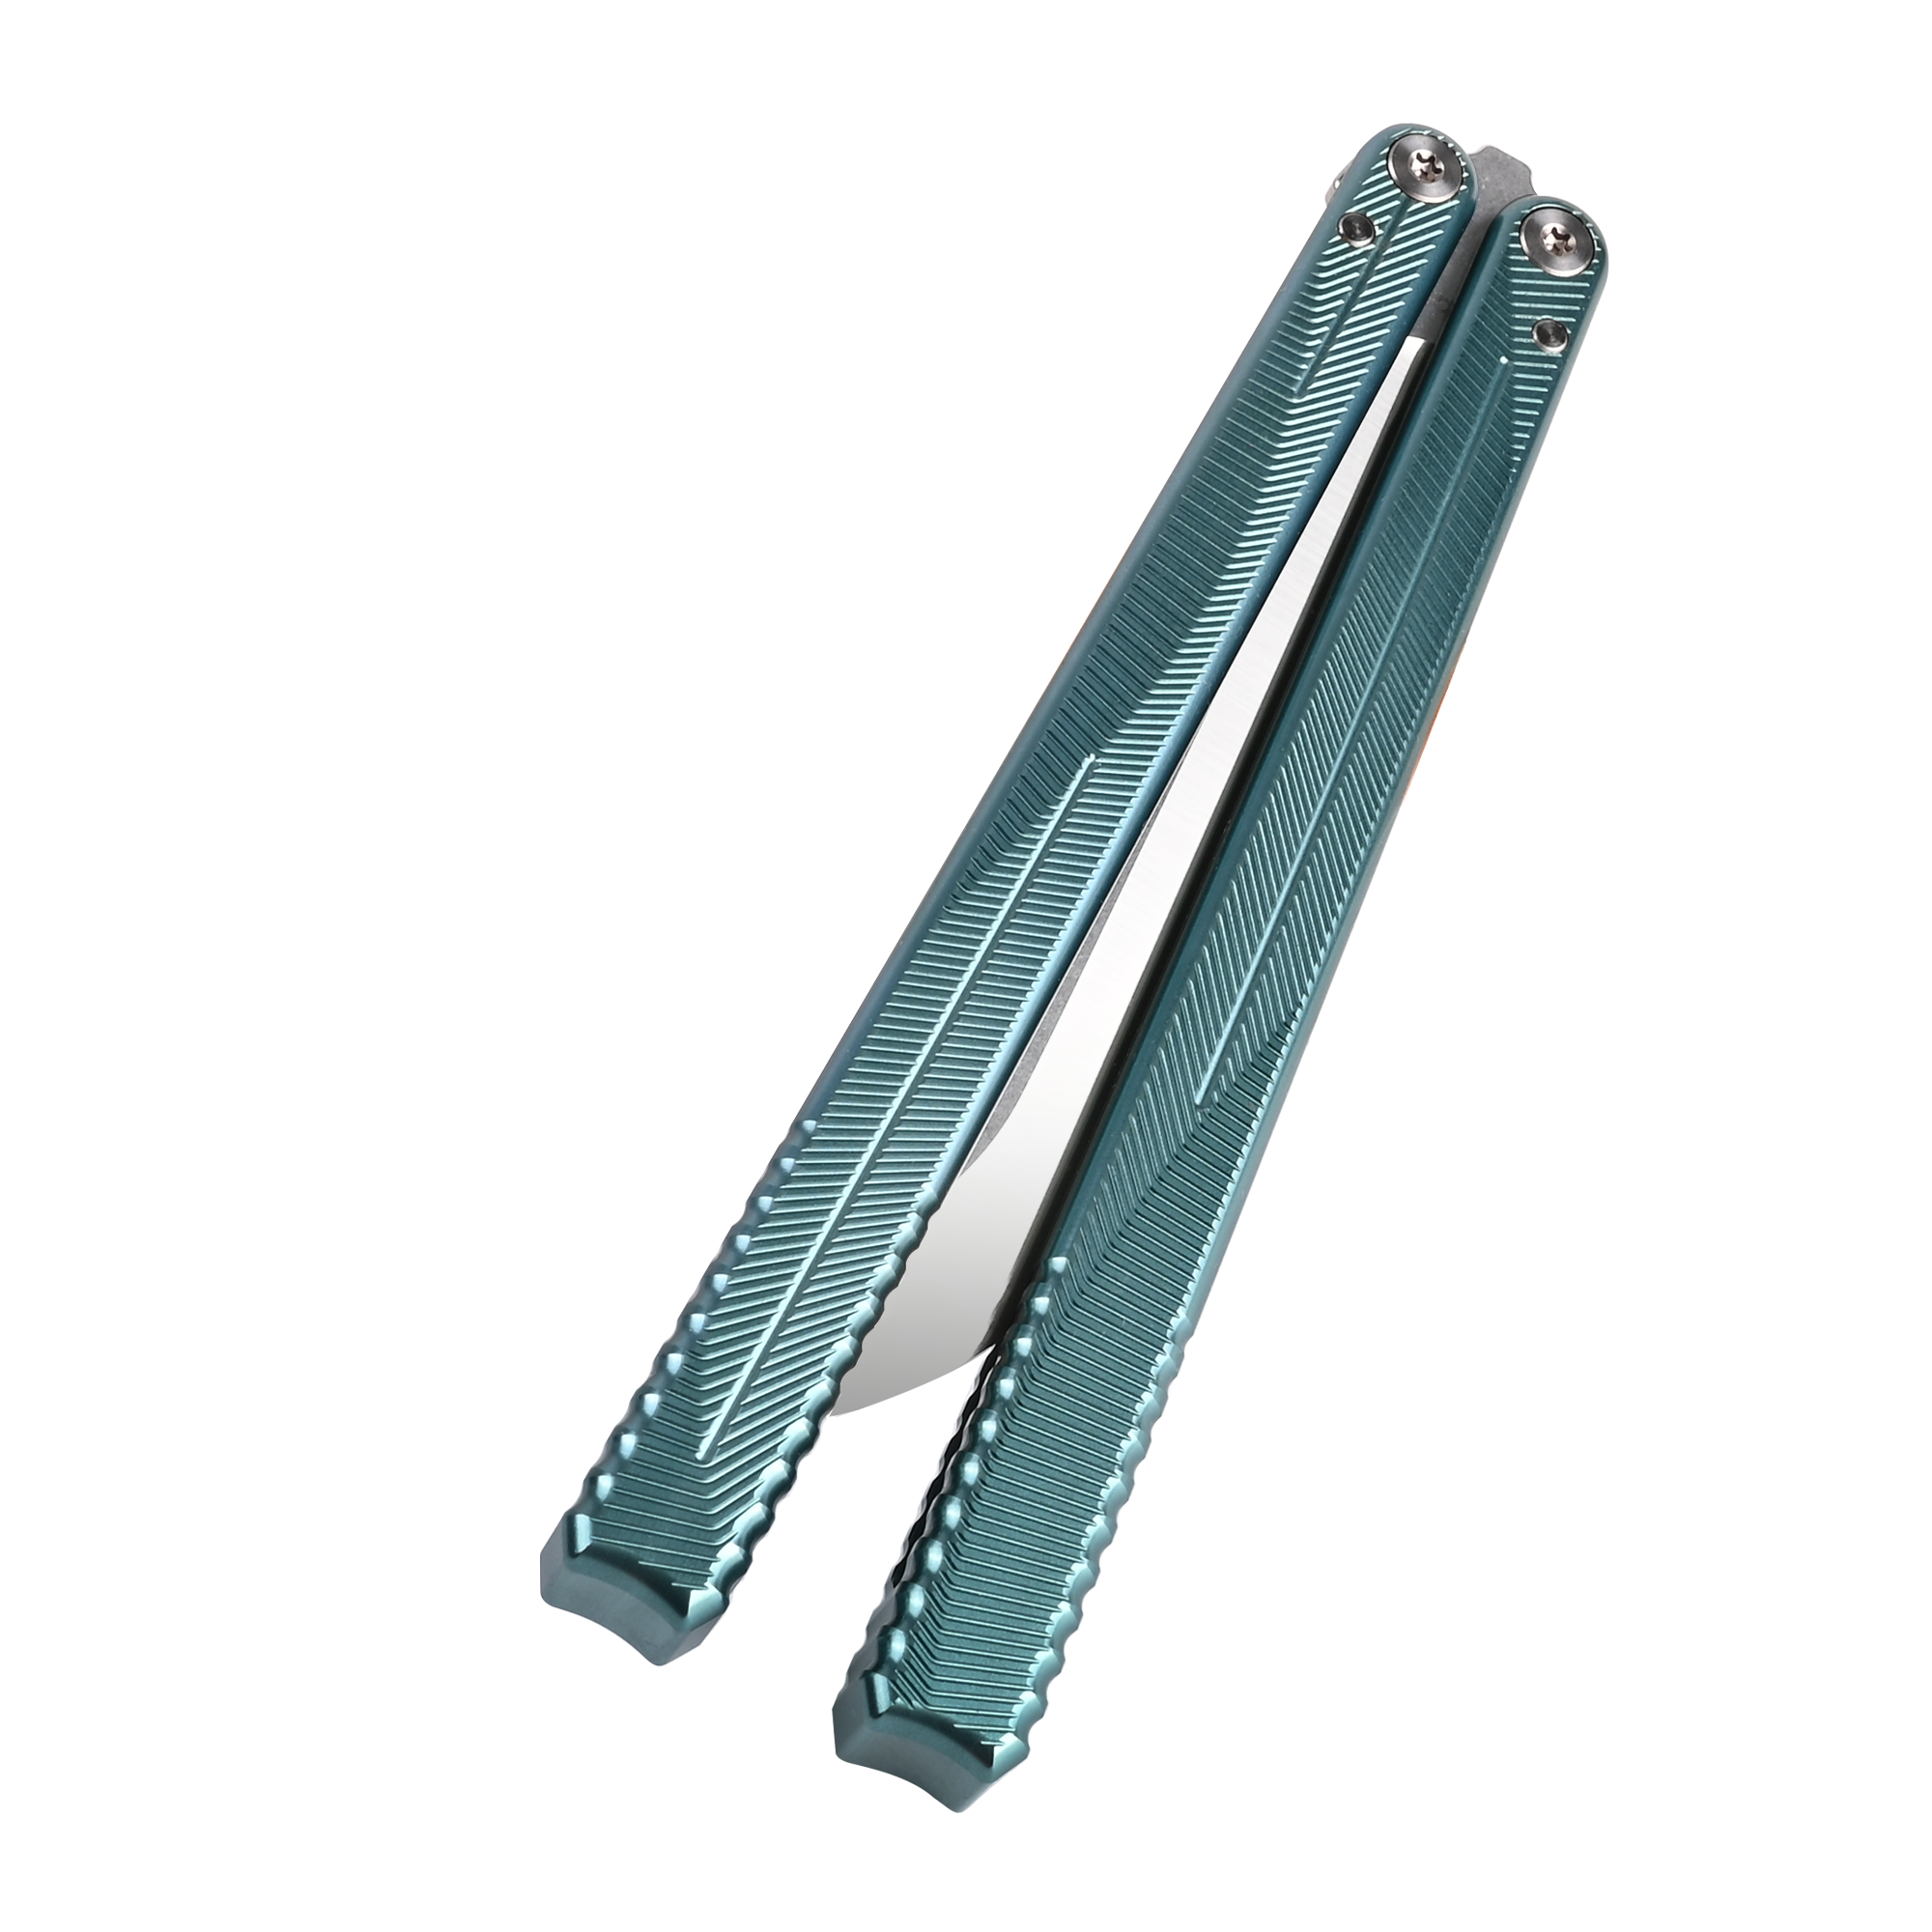 nabalis_butterfly_knives_hydra-teal-closed-1